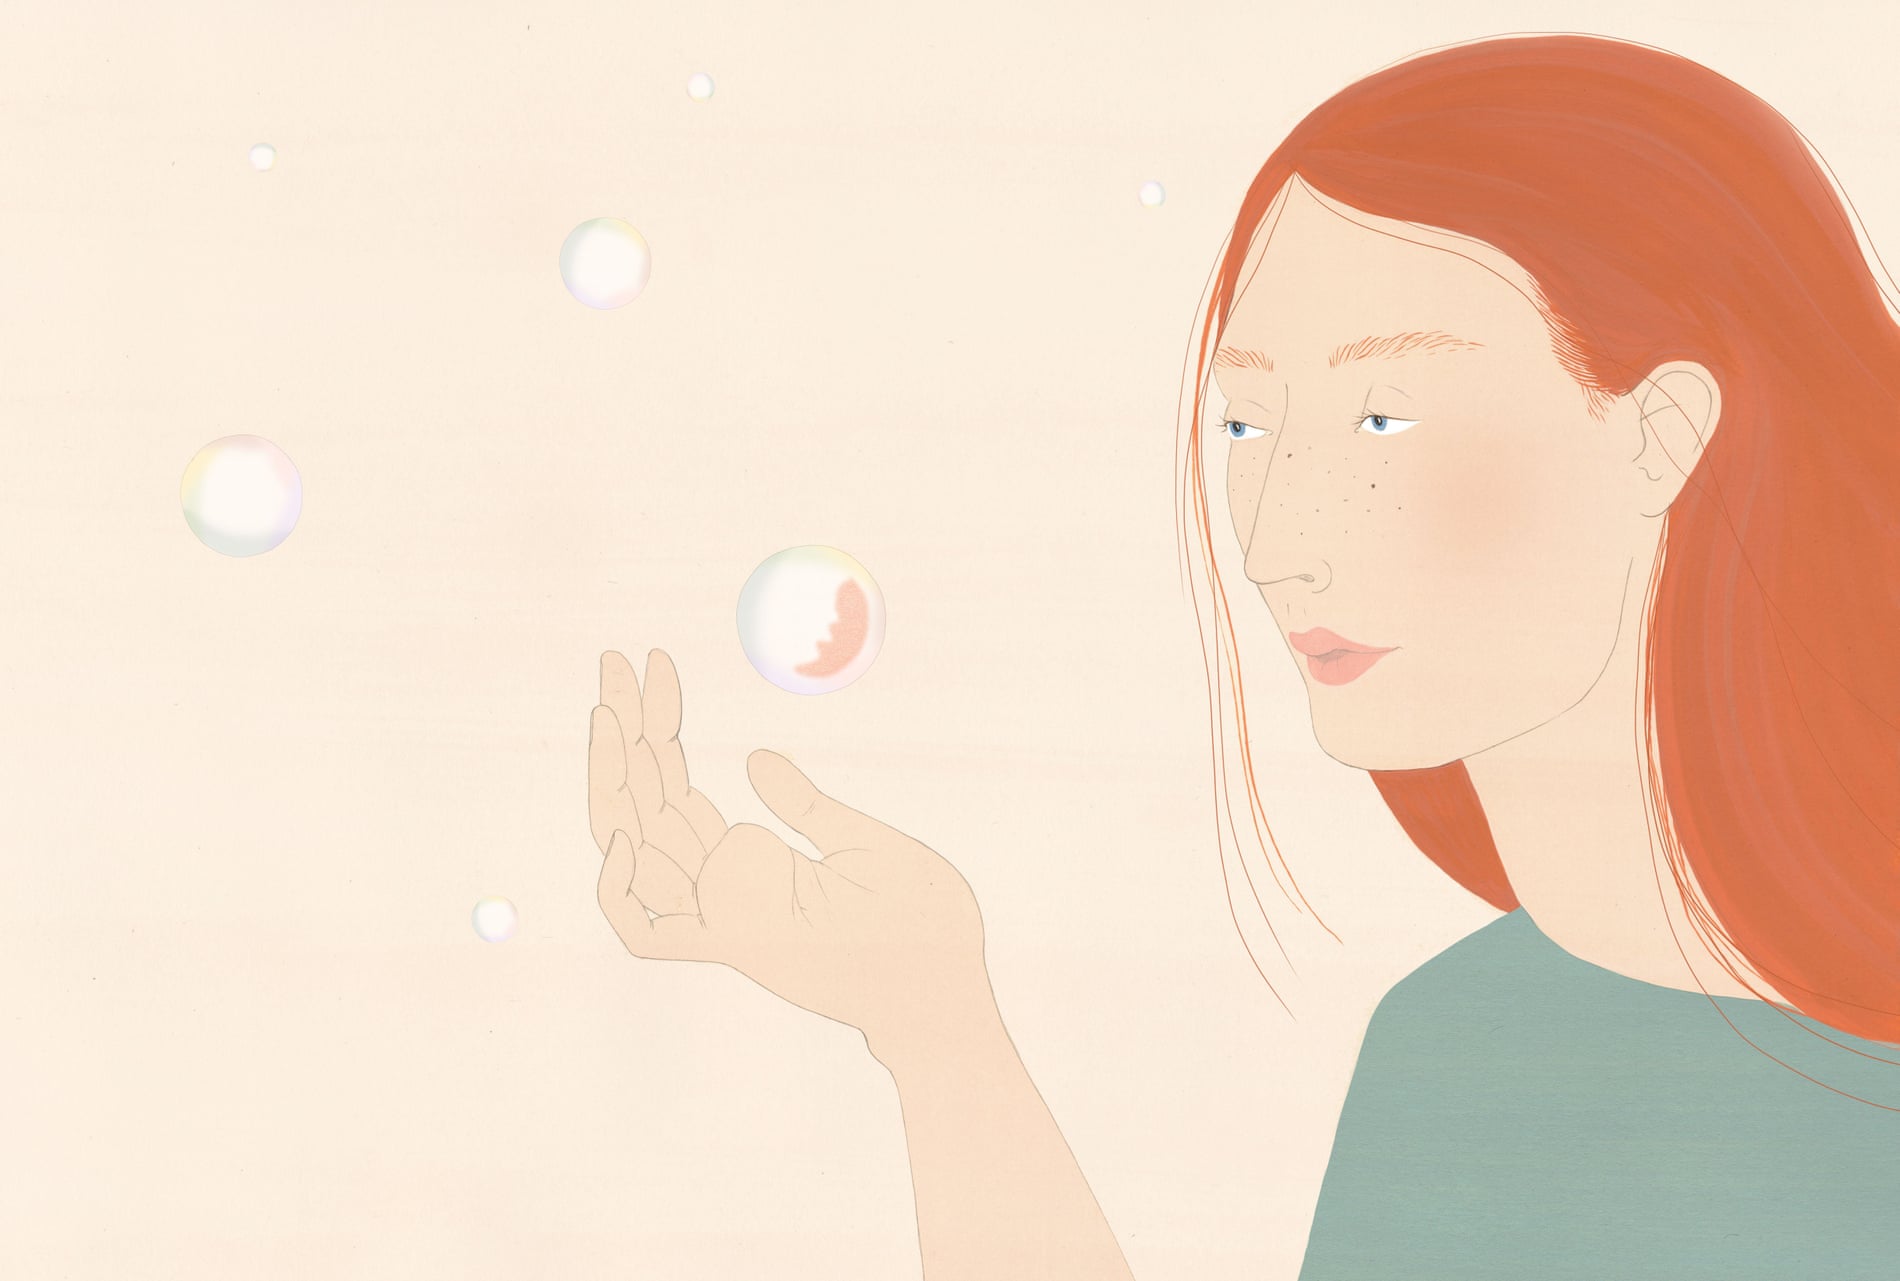 illustration: woman looking at bubble with foetus inside